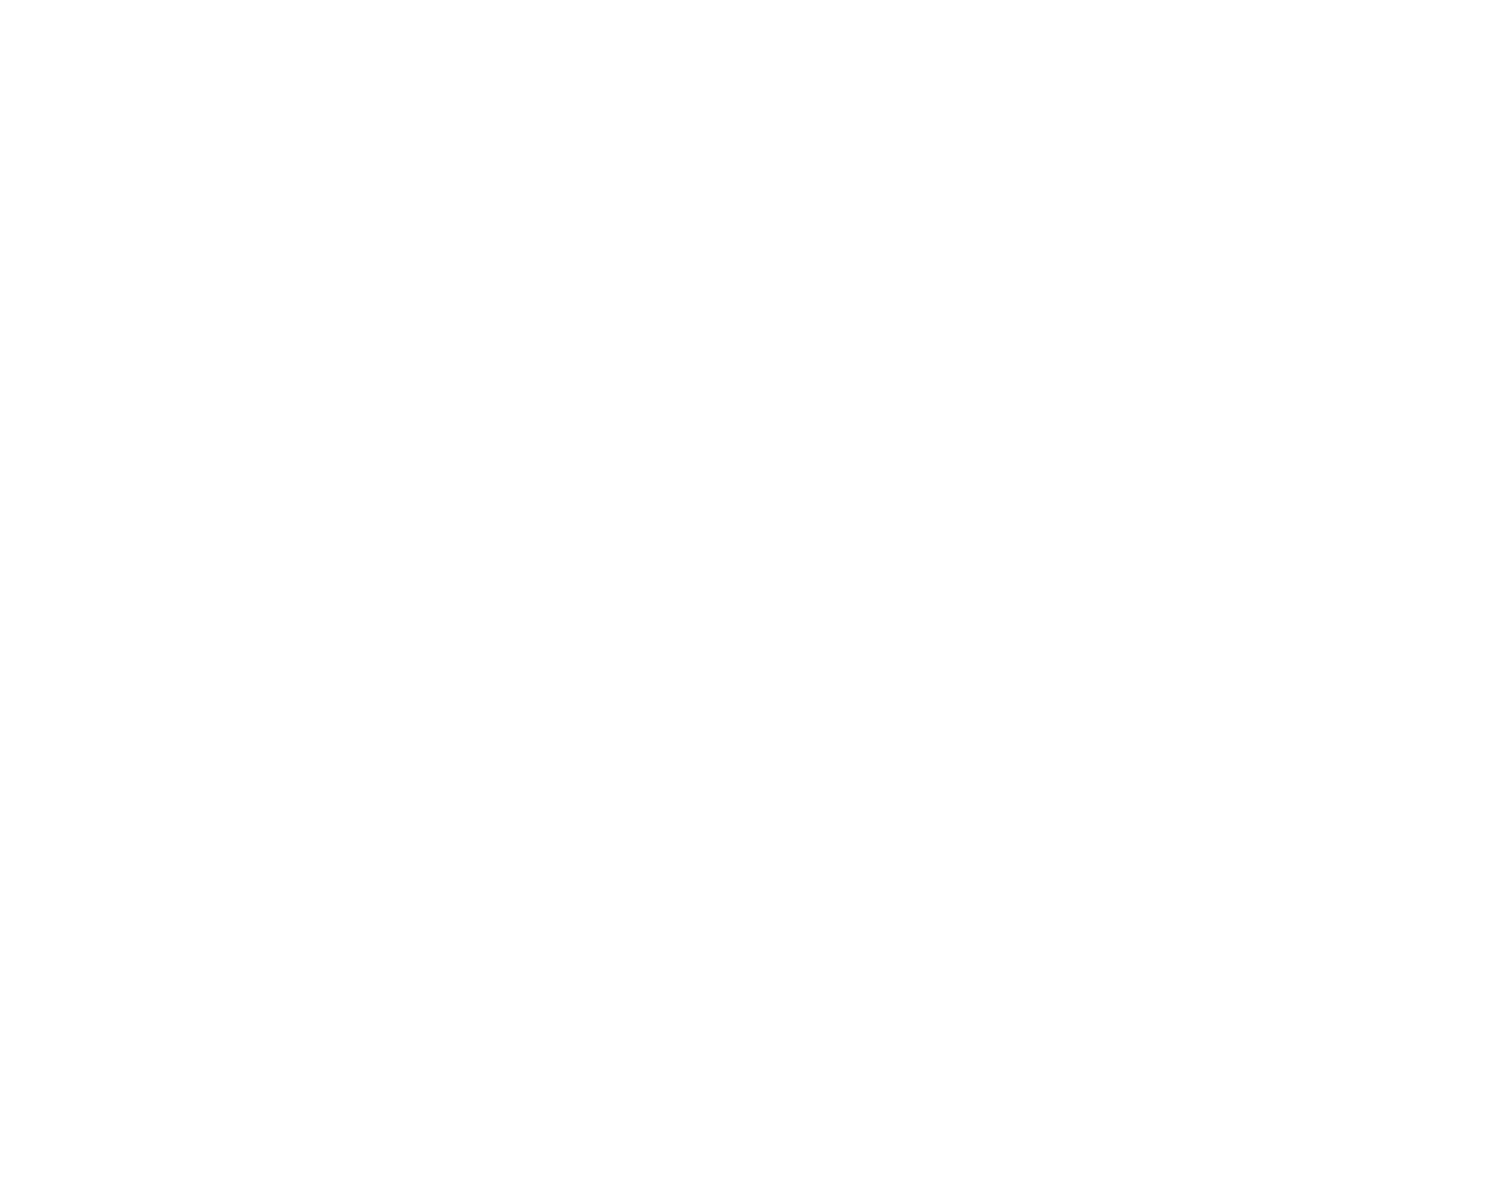 ReBirth Marketing and Consulting